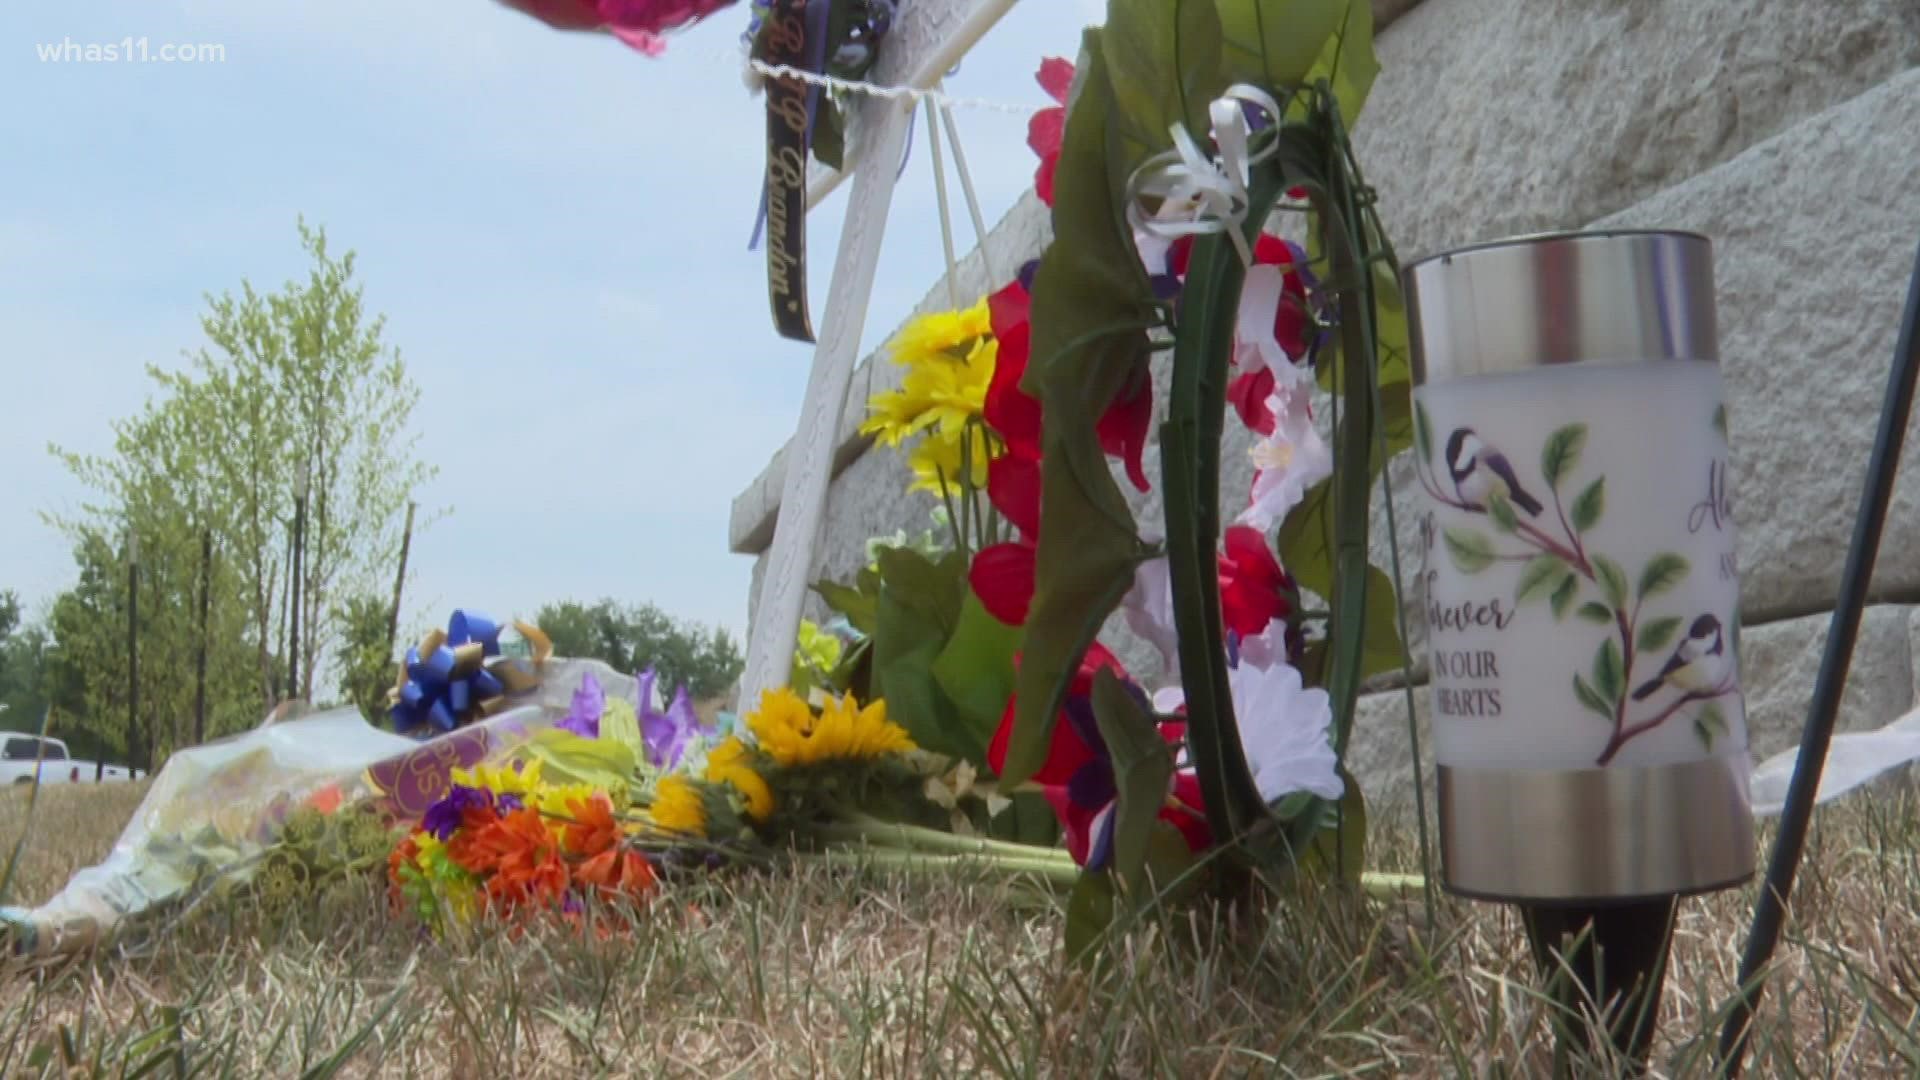 A Louisville Metro councilman is working on plans to permanently honor a deputy who was shot and killed, after a temporary memorial was taken down.